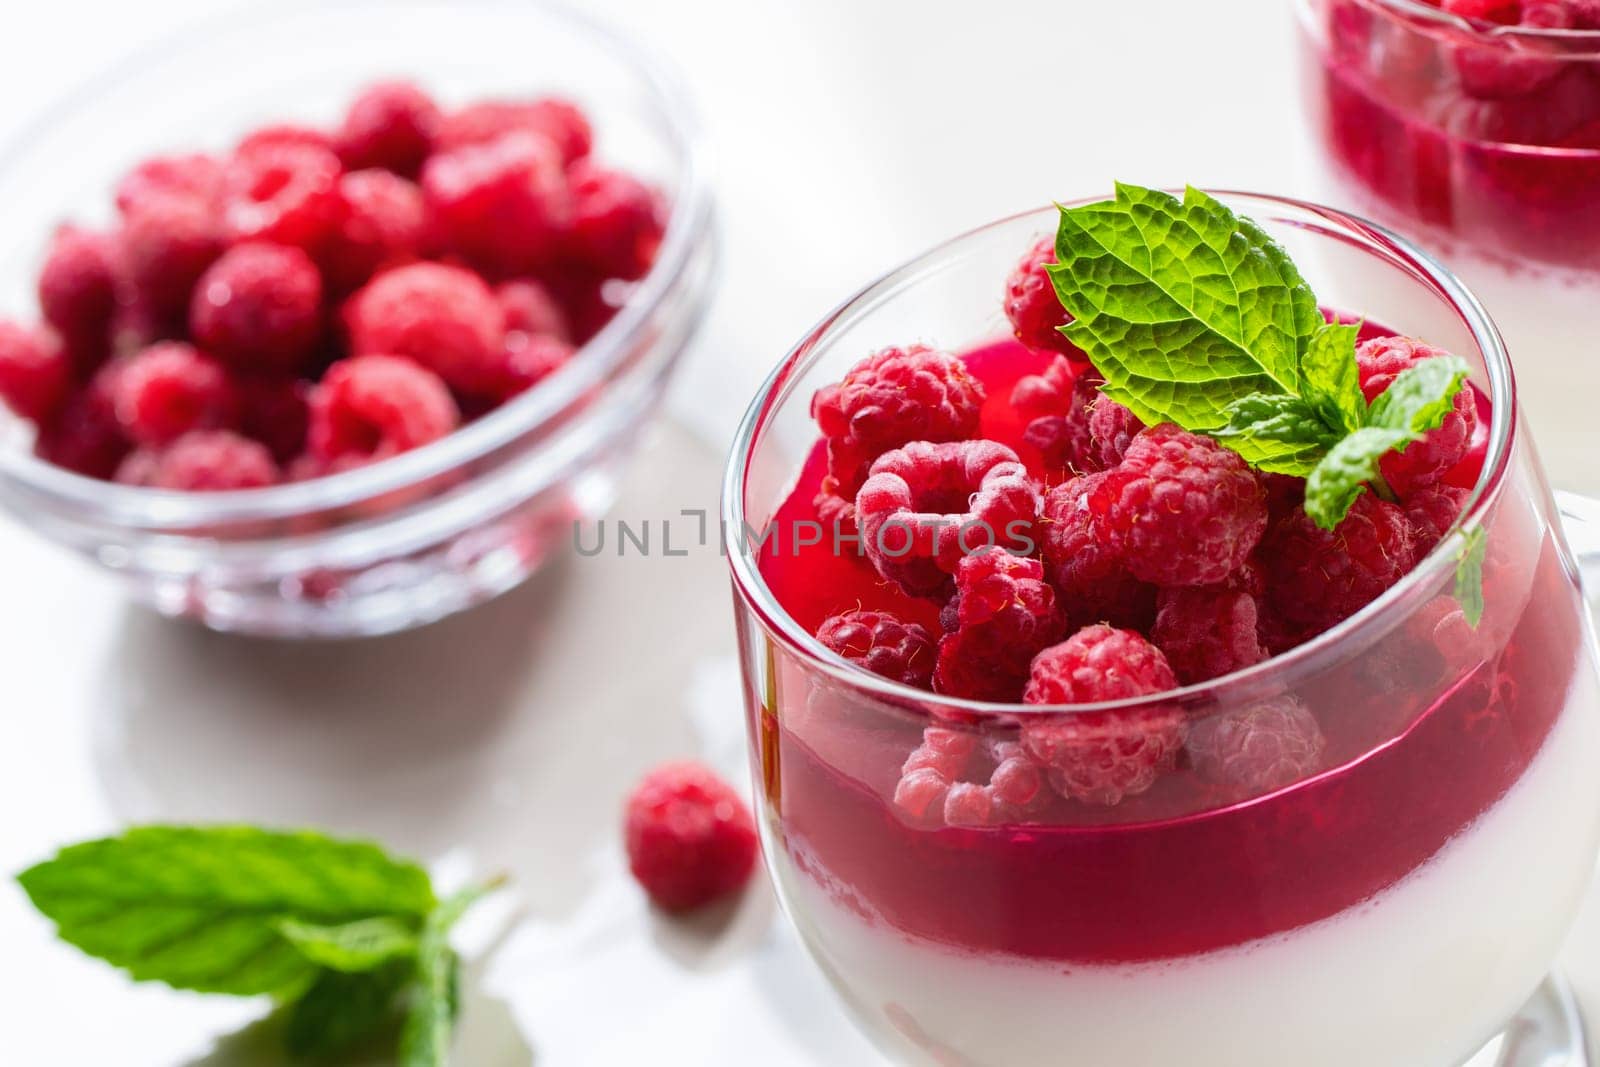 Panna cotta with raspberry jelly and mint leaves in glass glasses on a white table, close up.